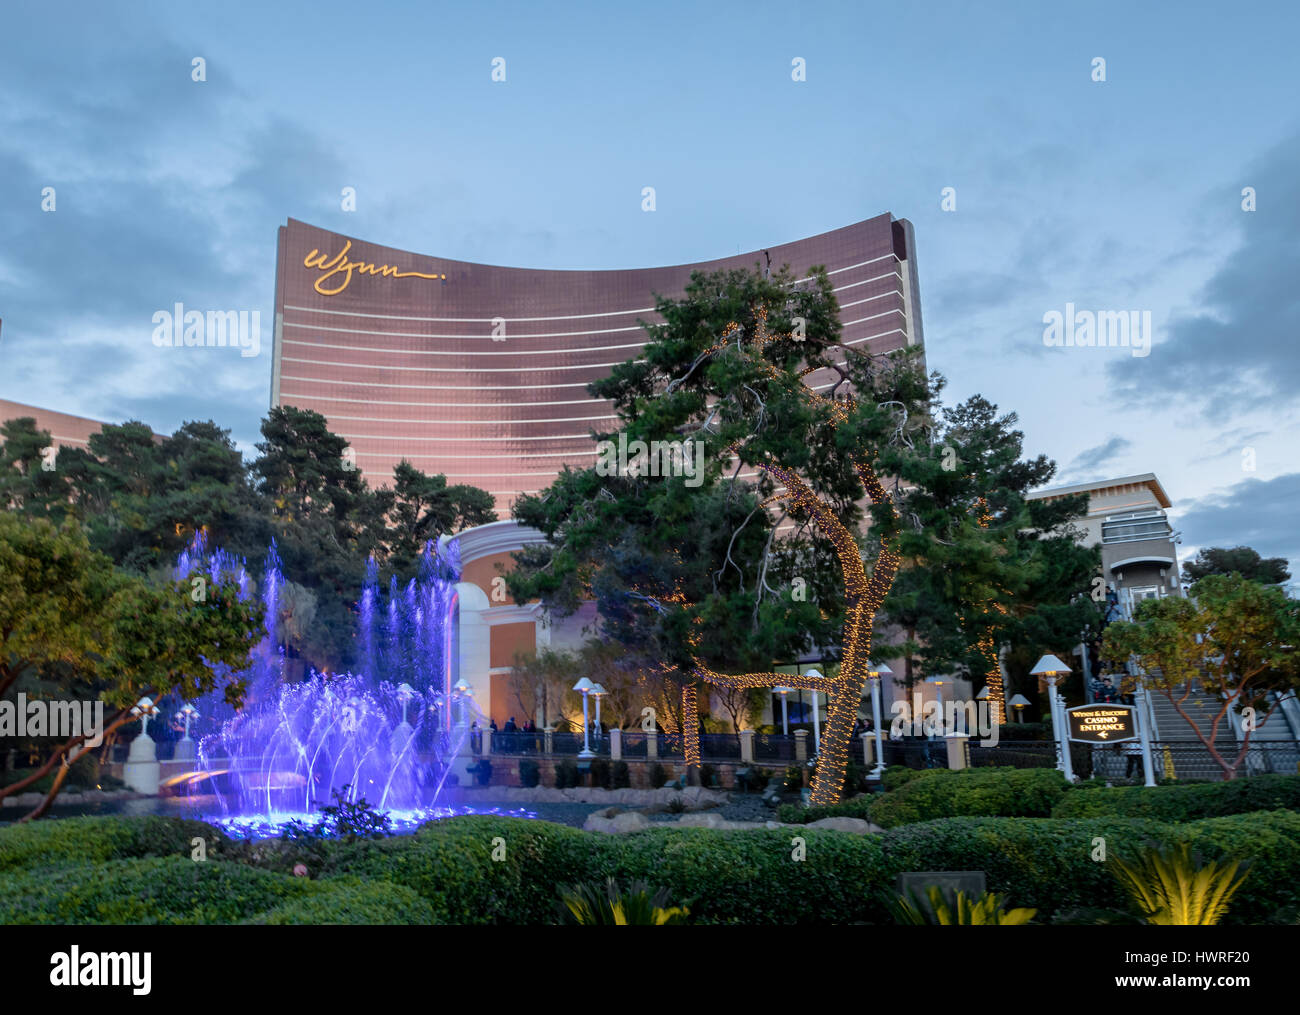 Fountains in front of Wynn Hotel and Casino at sunset - Las Vegas, Nevada, USA Stock Photo